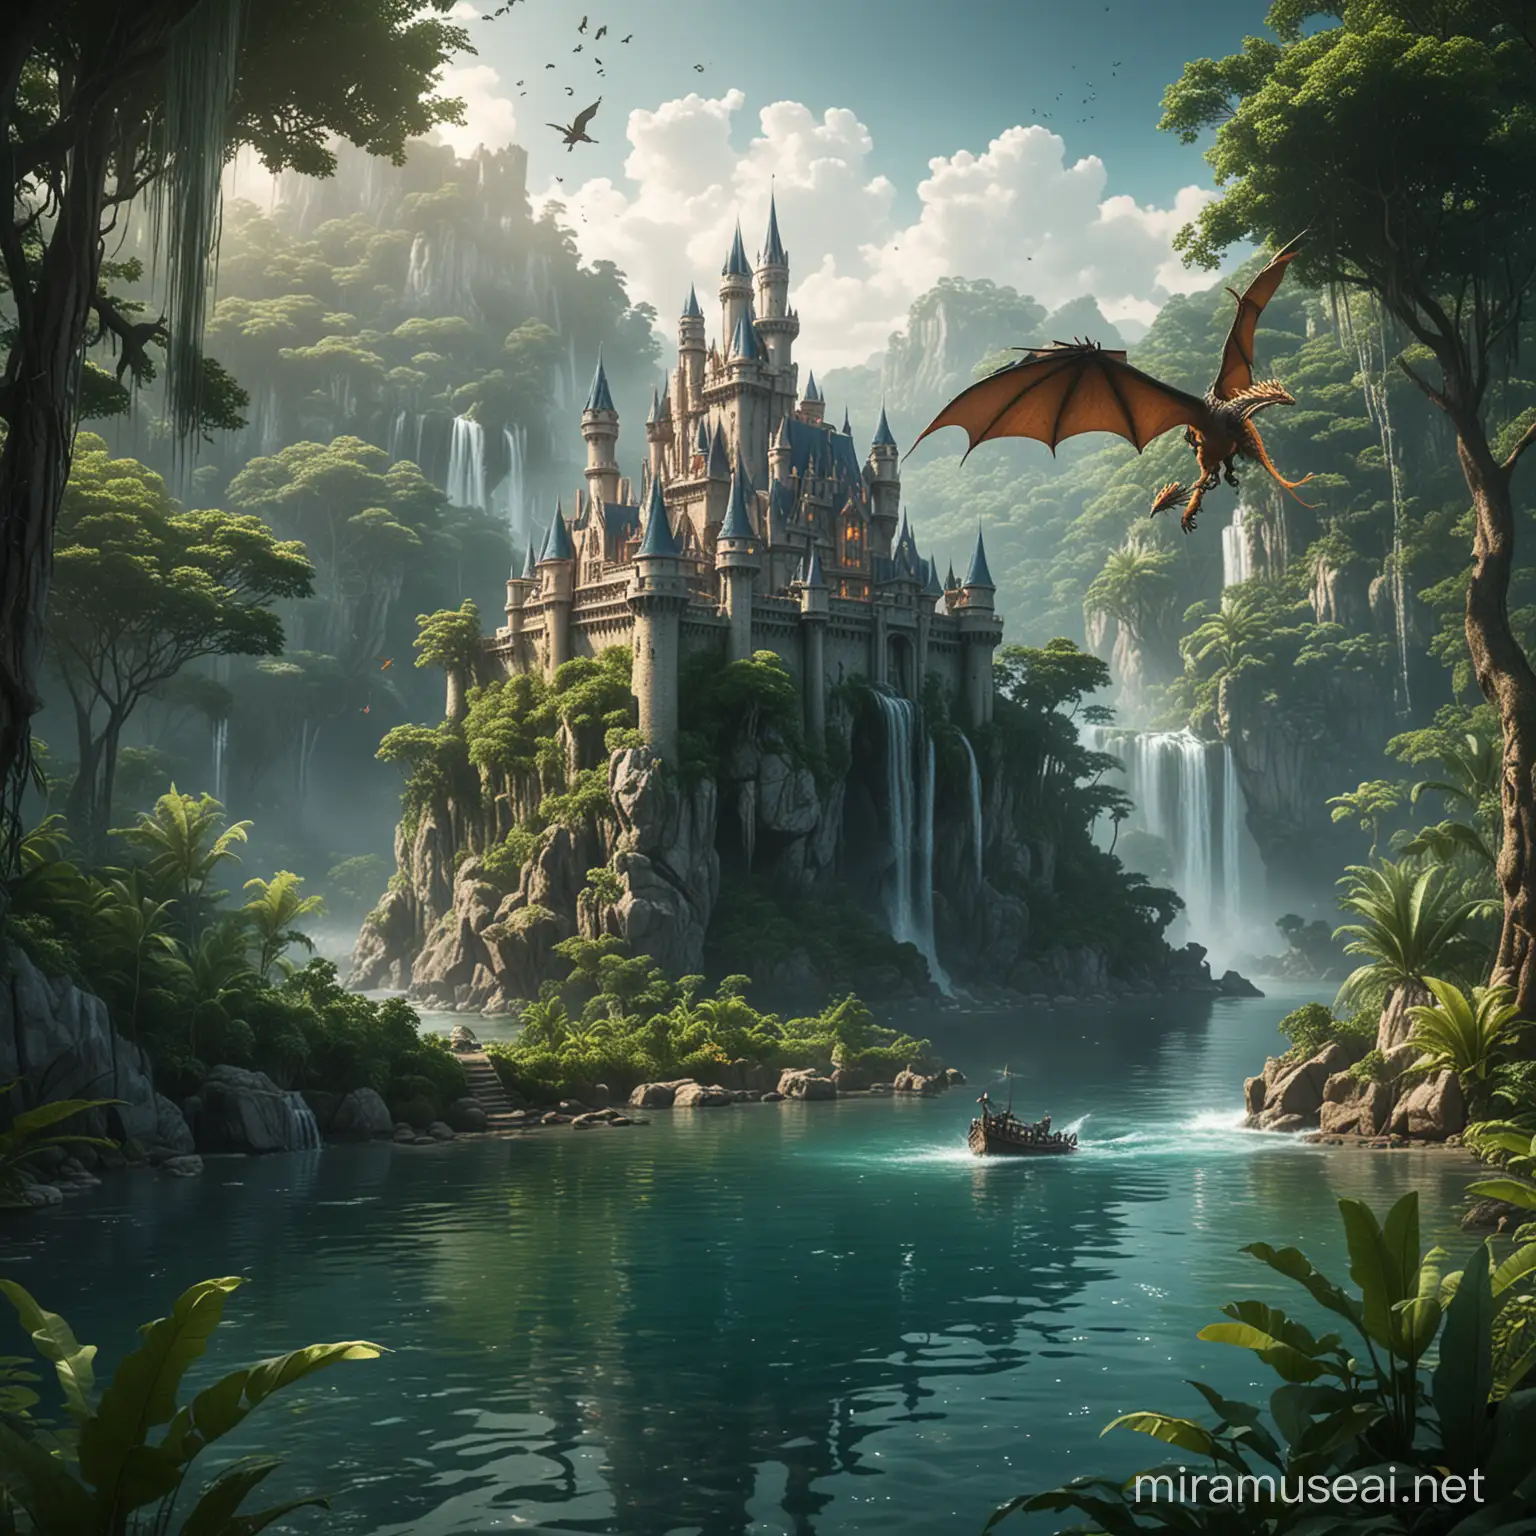 Magical castle in the middle of the jungle surrounded by water and a dragon flying above 